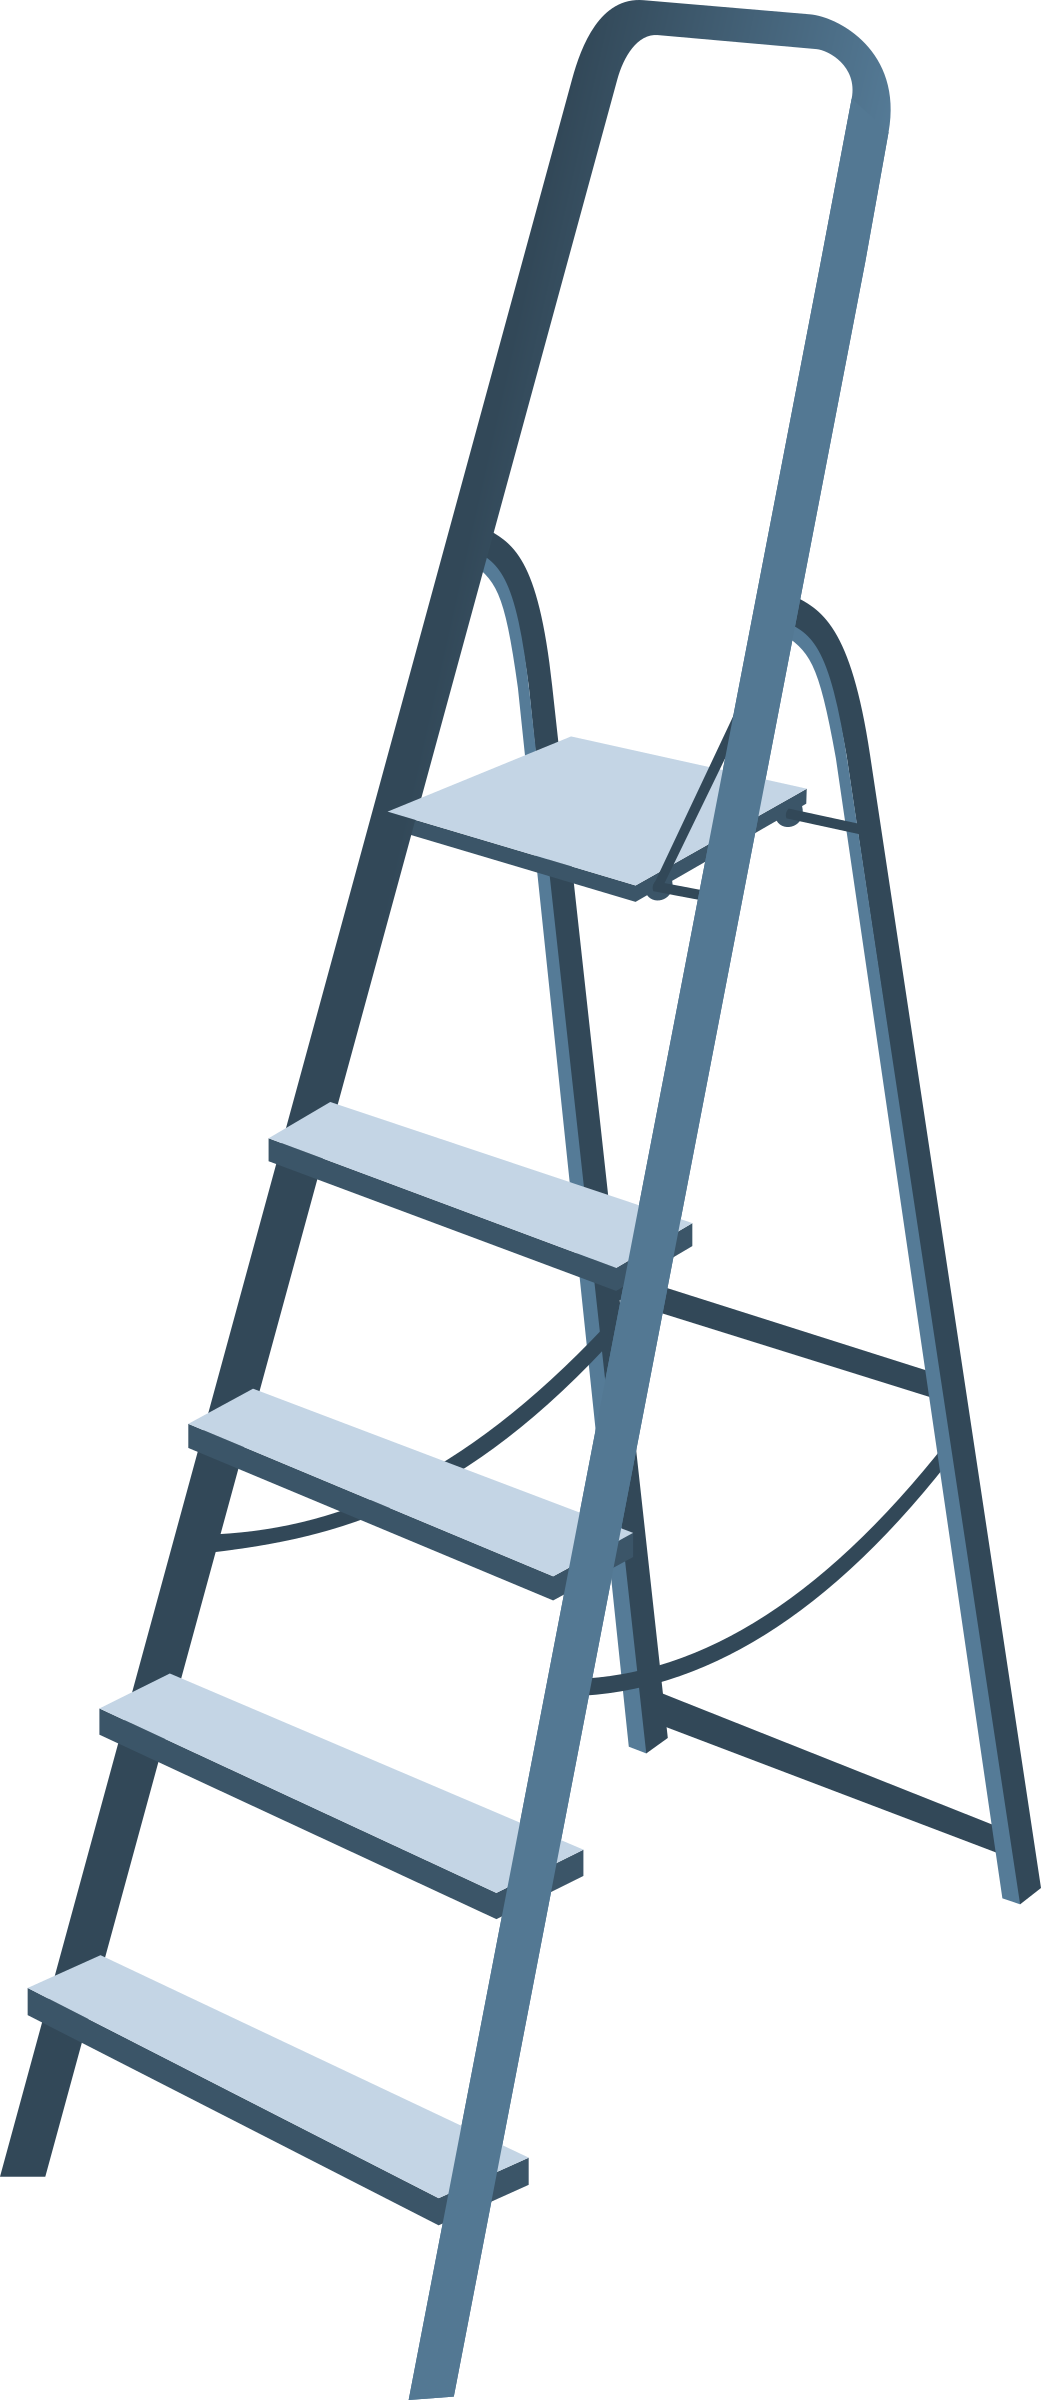 Step by at getdrawings. Ladder clipart svg